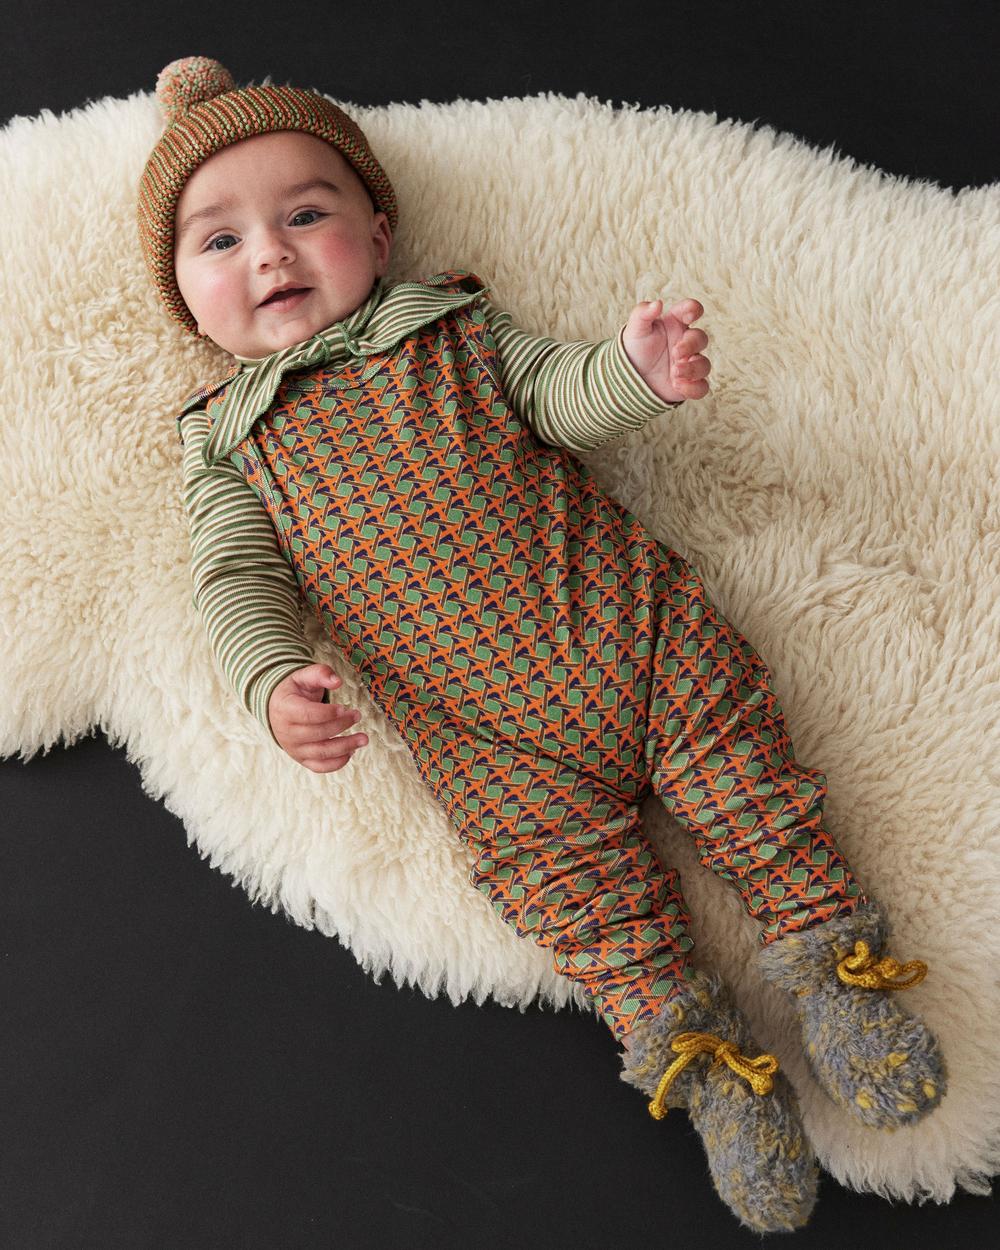 misha and puff Scout Onesie 12-18m